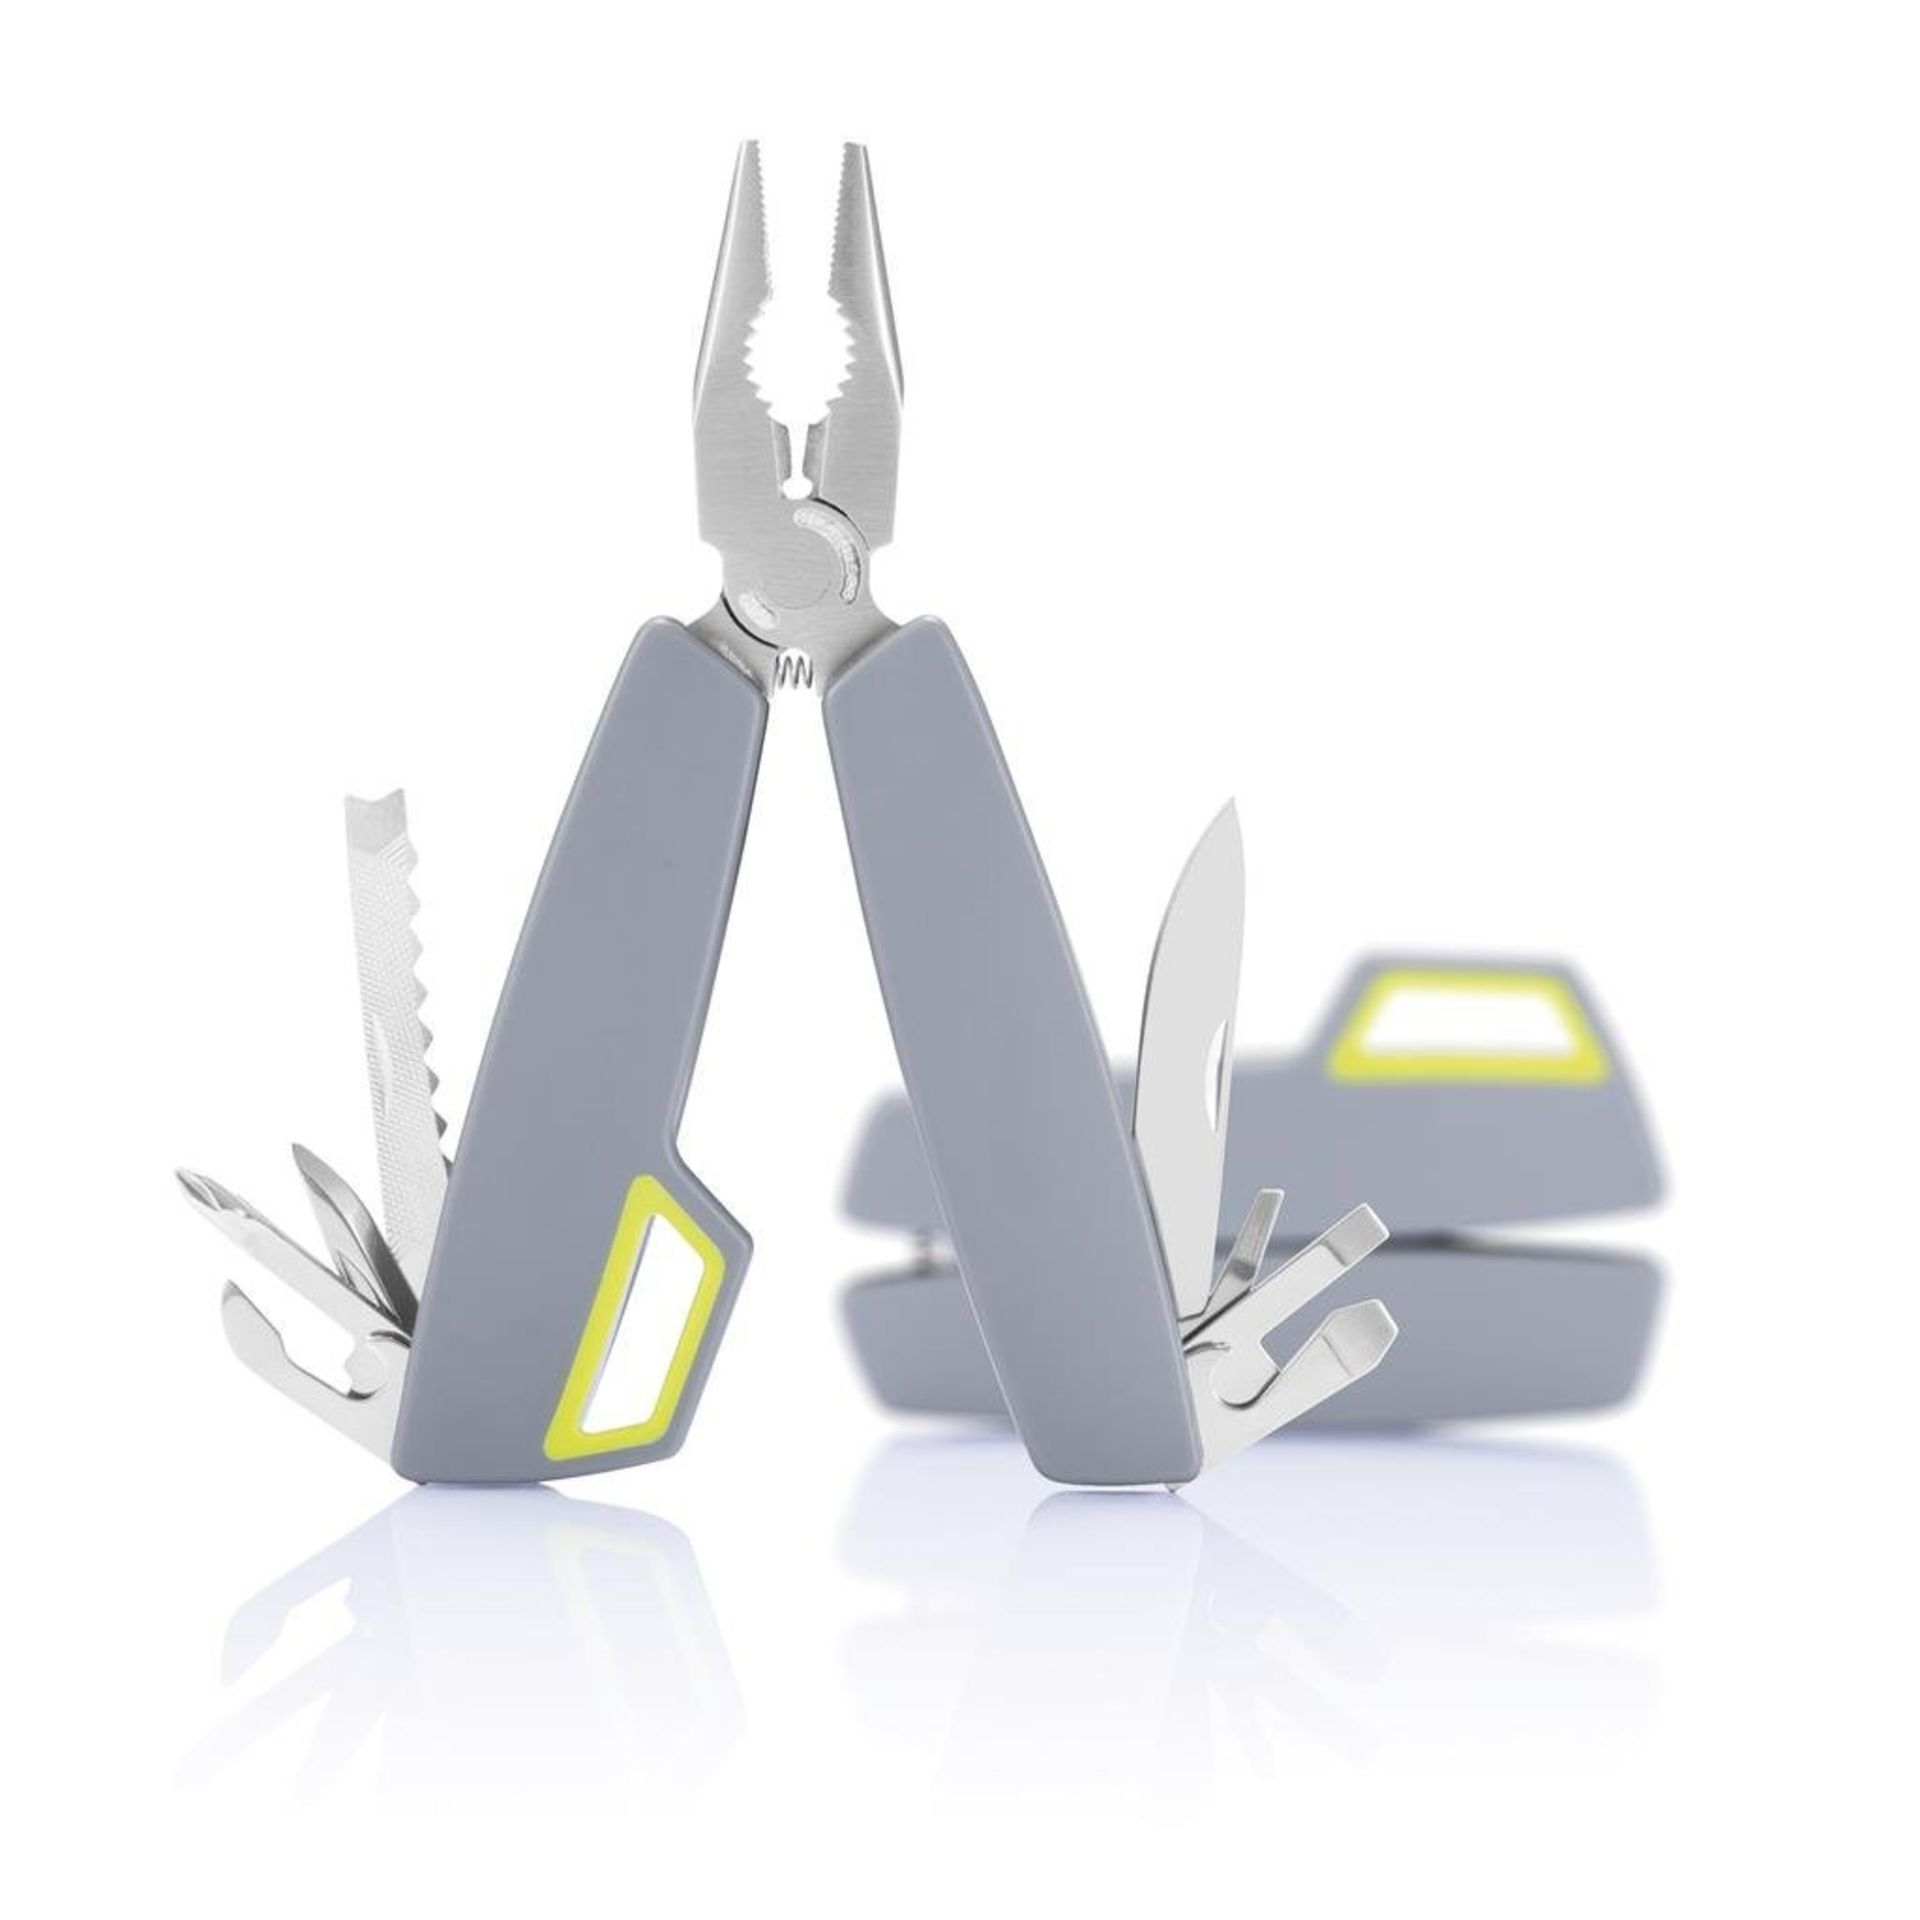 V Brand New Tovo Multitool by XDDesign in Gift Box with Carry Pouch and Carabinier Clip ISP £23.